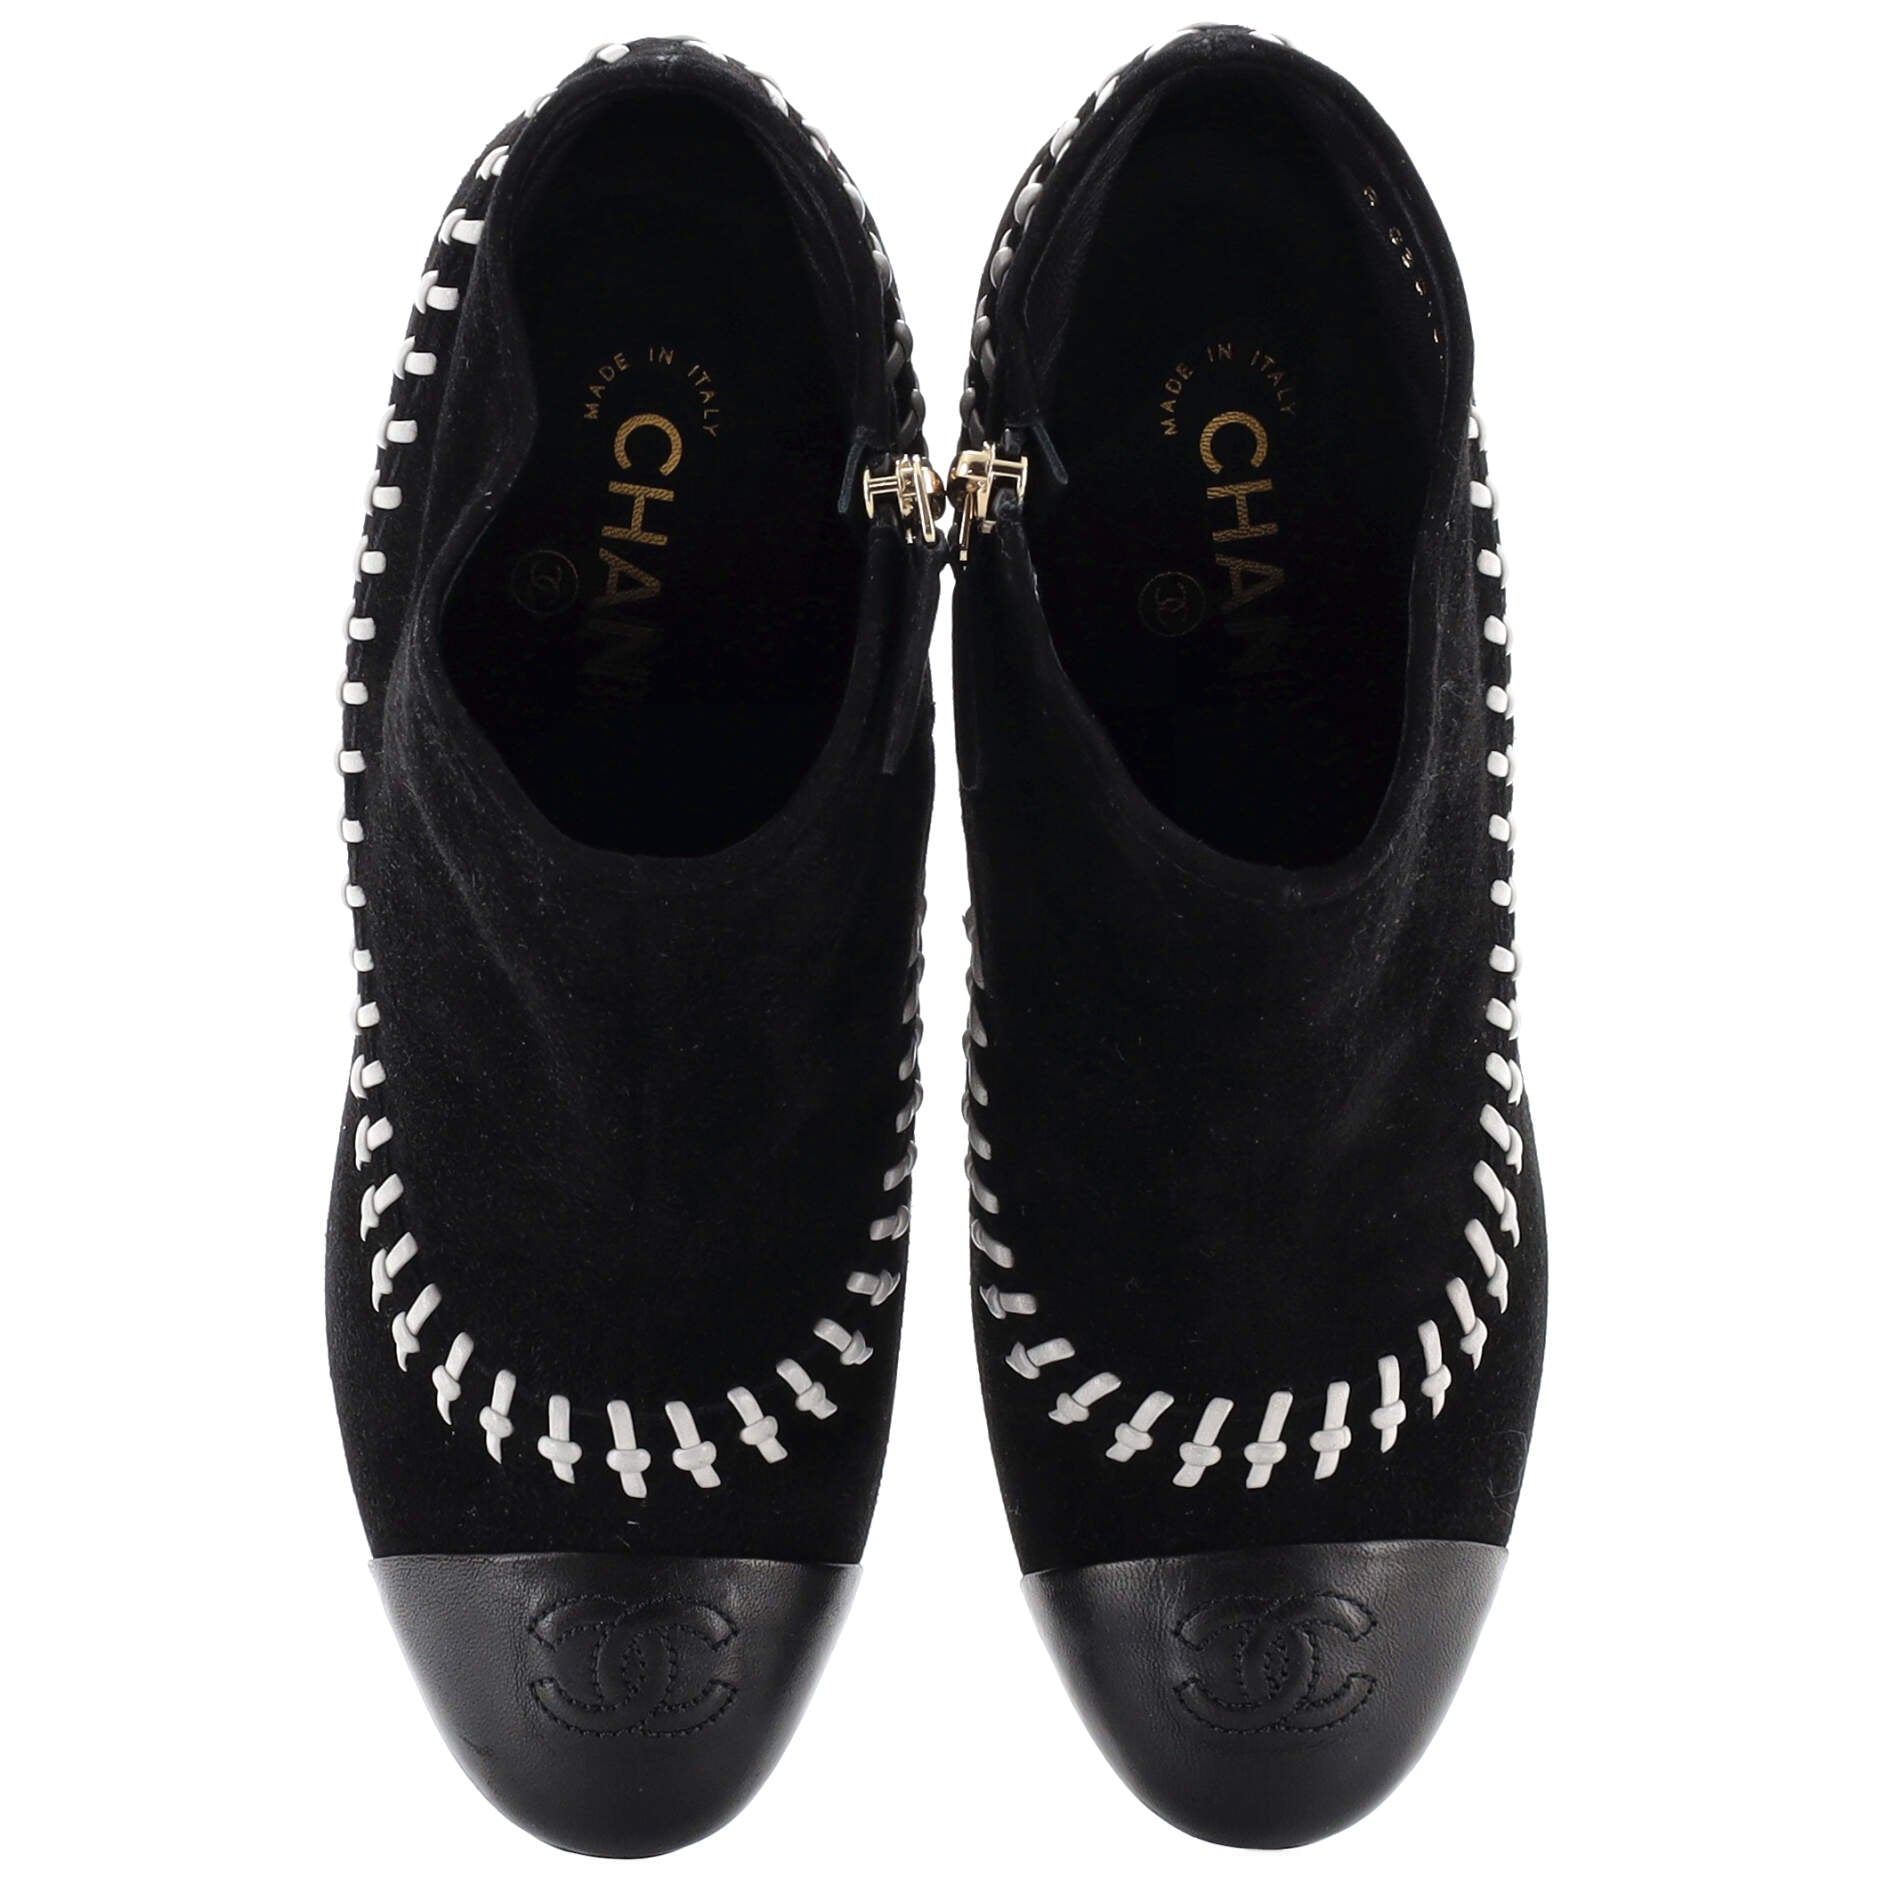 Chanel Black/White Neoprene Fabric and Leather Stitched CC Lace Up